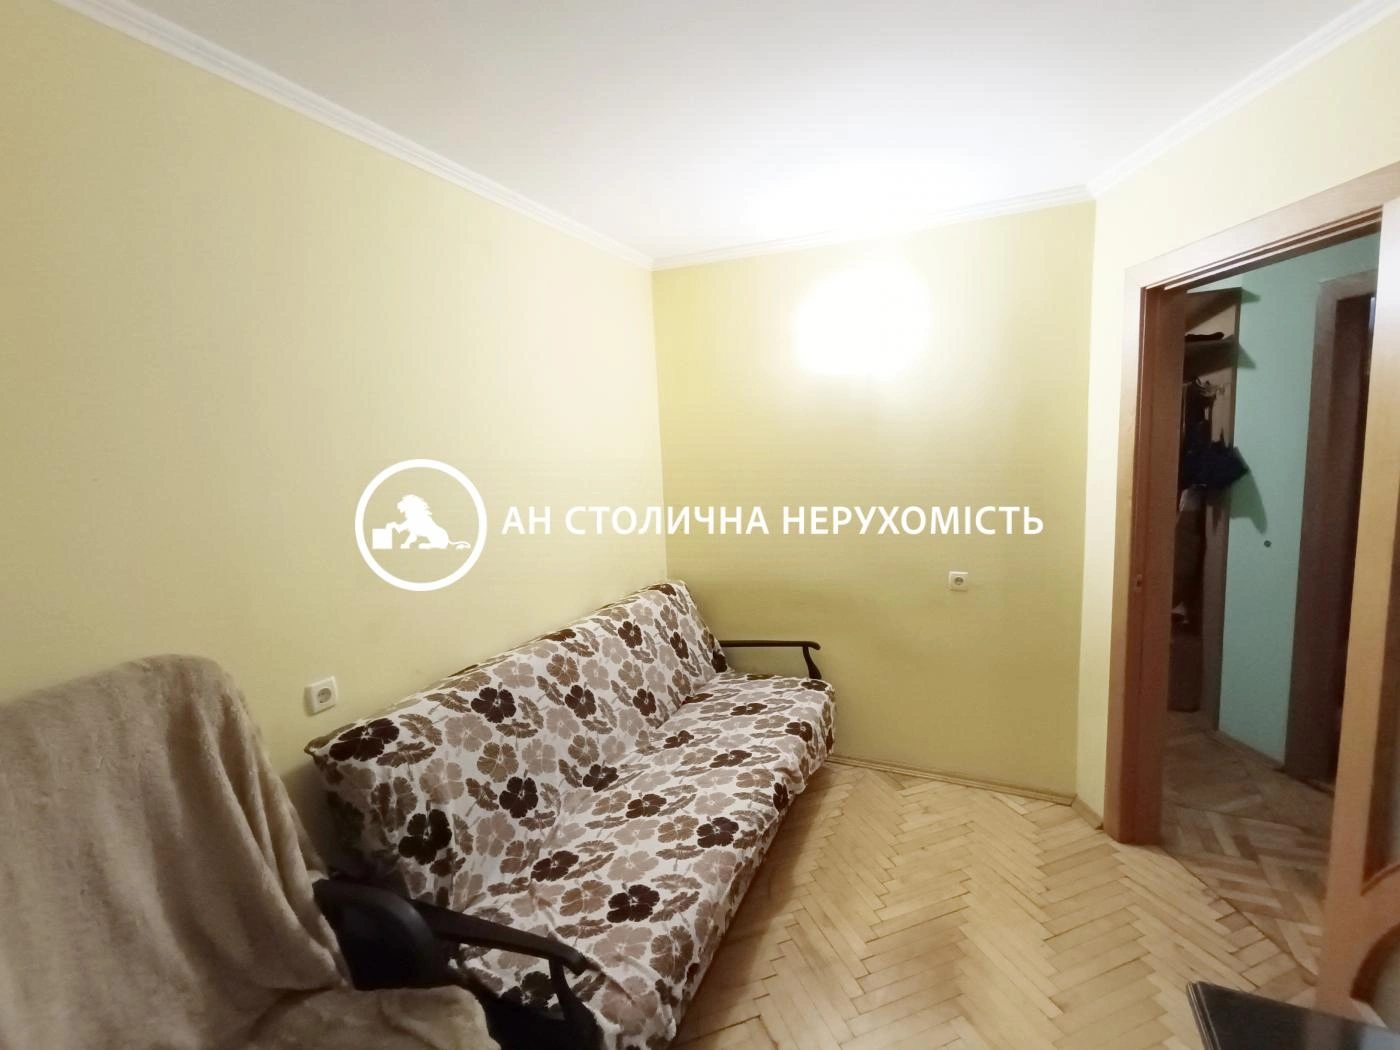 Apartment for rent. 2 rooms, 50 m², 4th floor/9 floors. Saperne Pole, Kyiv. 